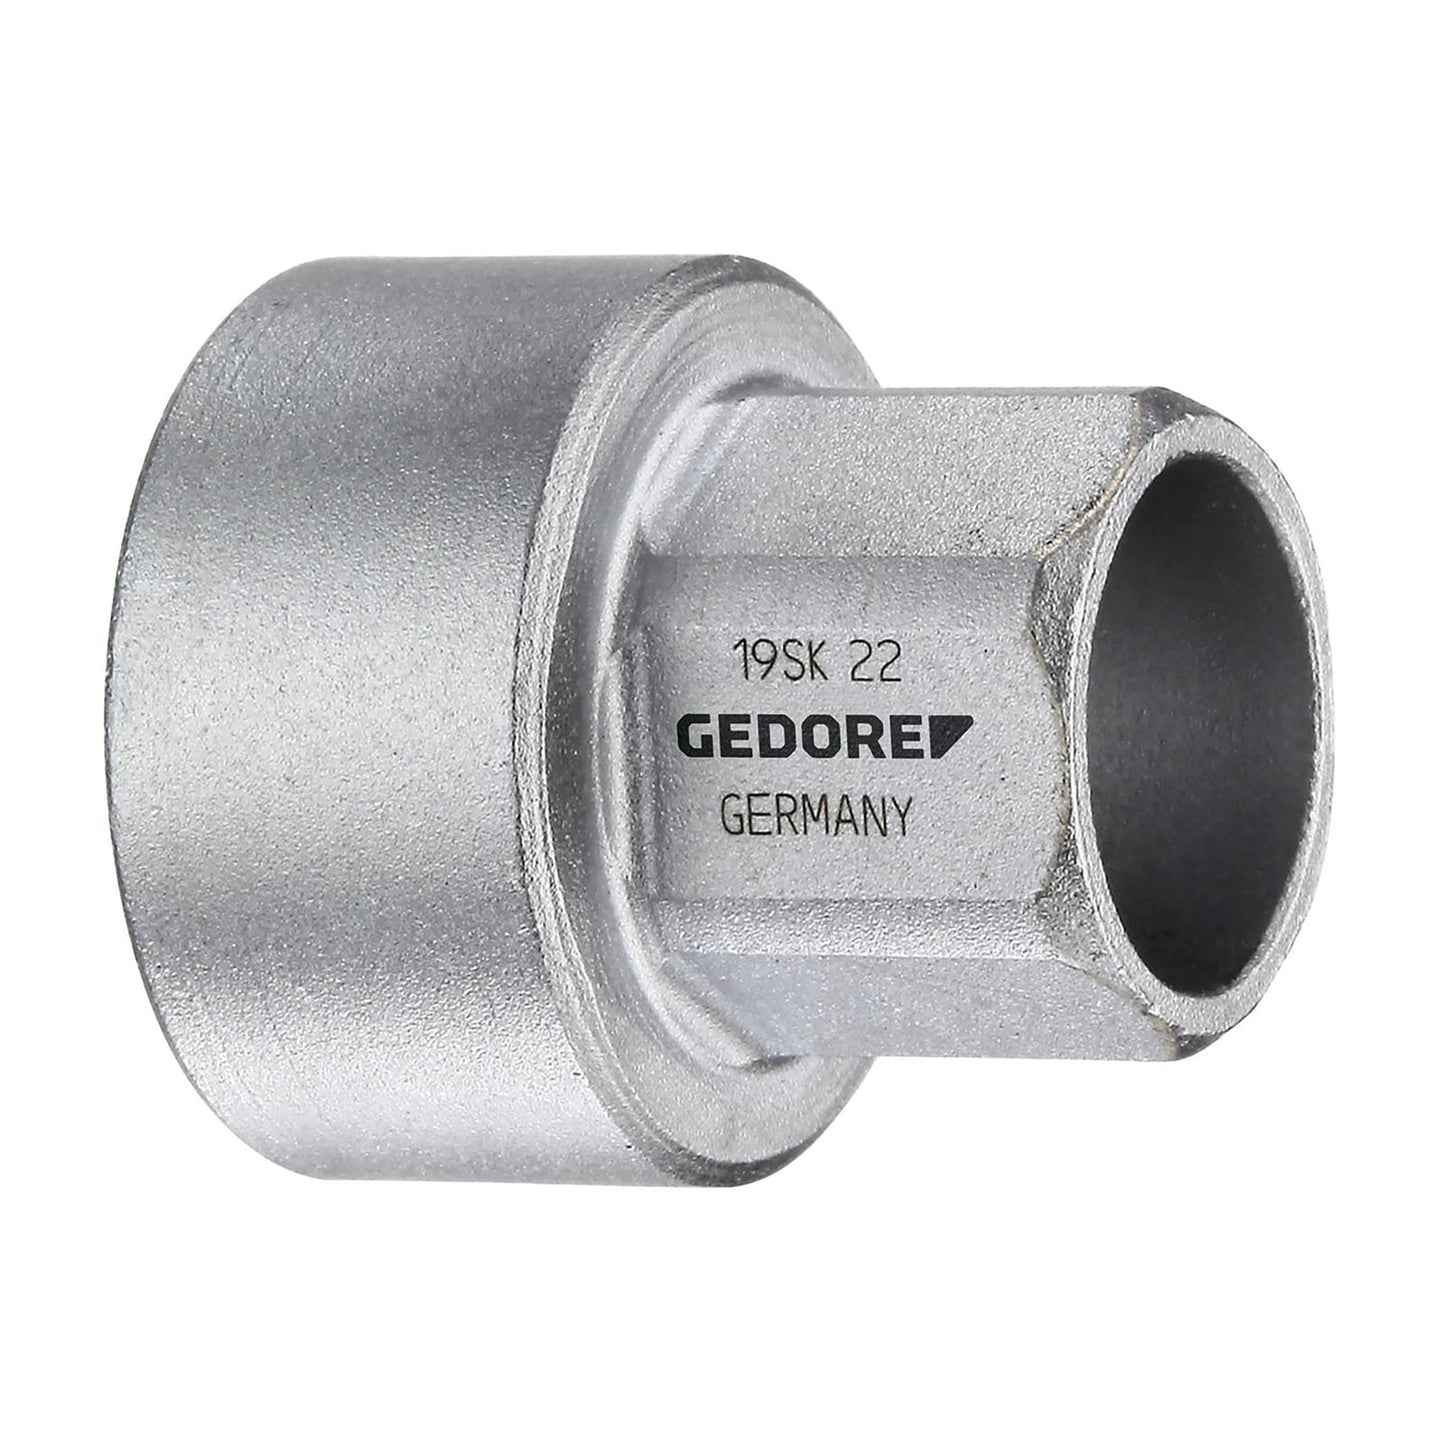 GEDORE 19 SK 13 - Special Hex socket 1/2", 13mm (2225875)